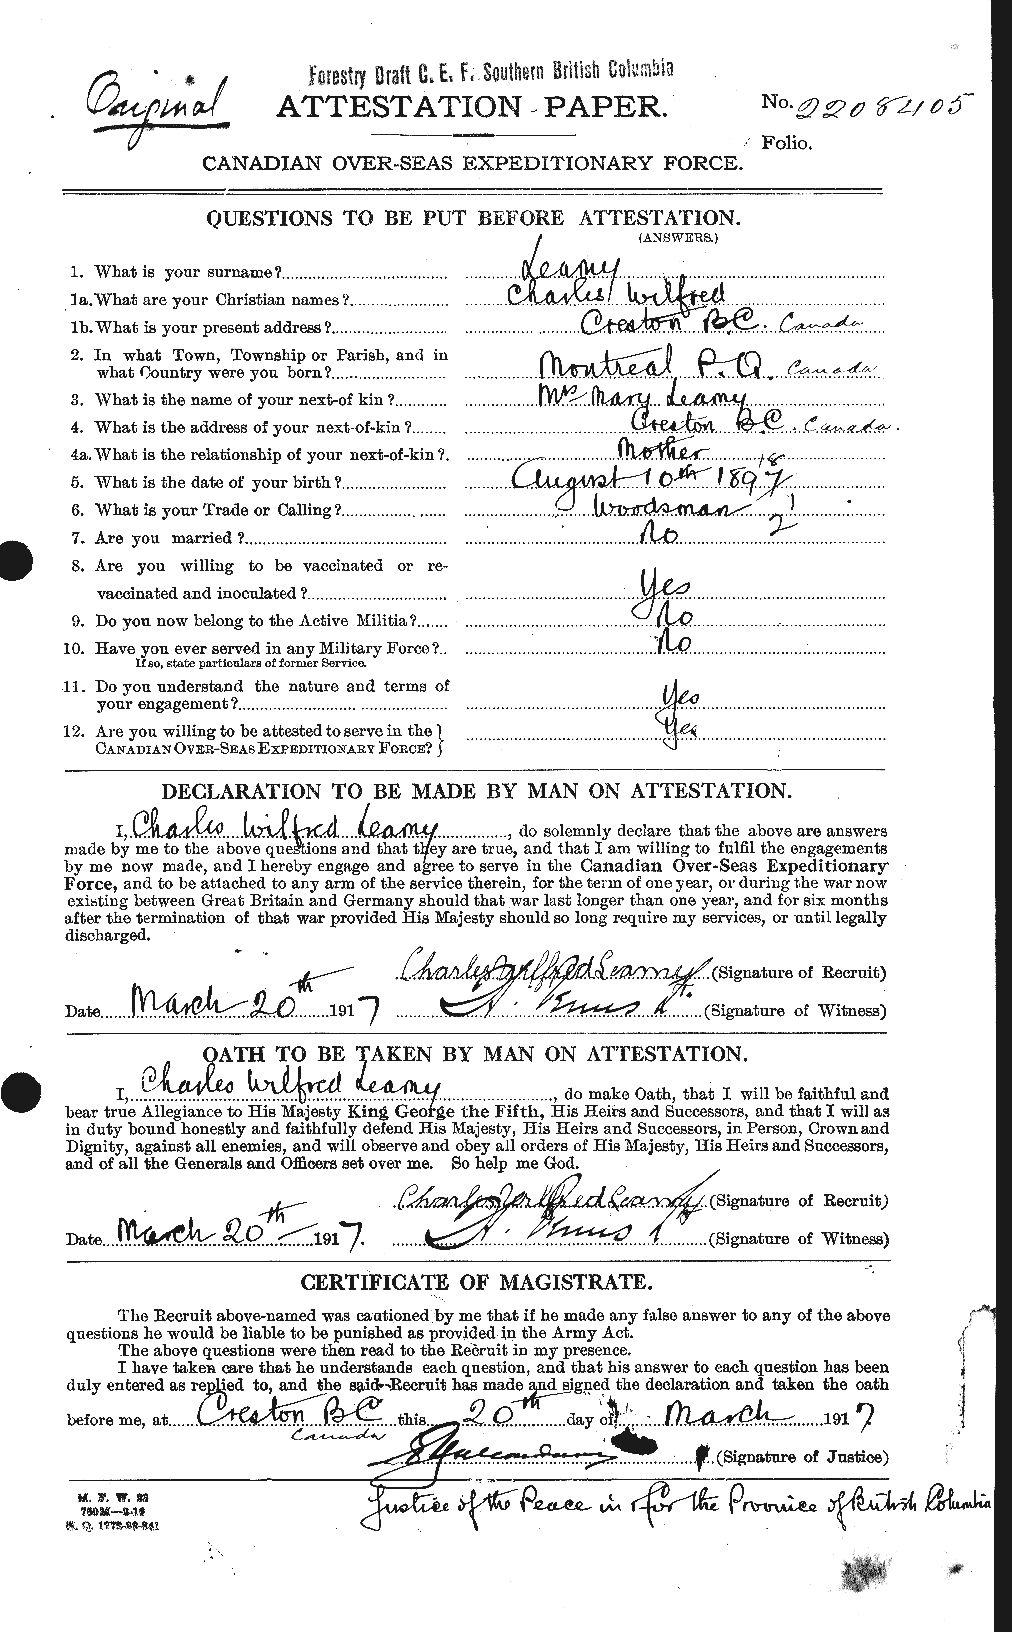 Personnel Records of the First World War - CEF 456060a